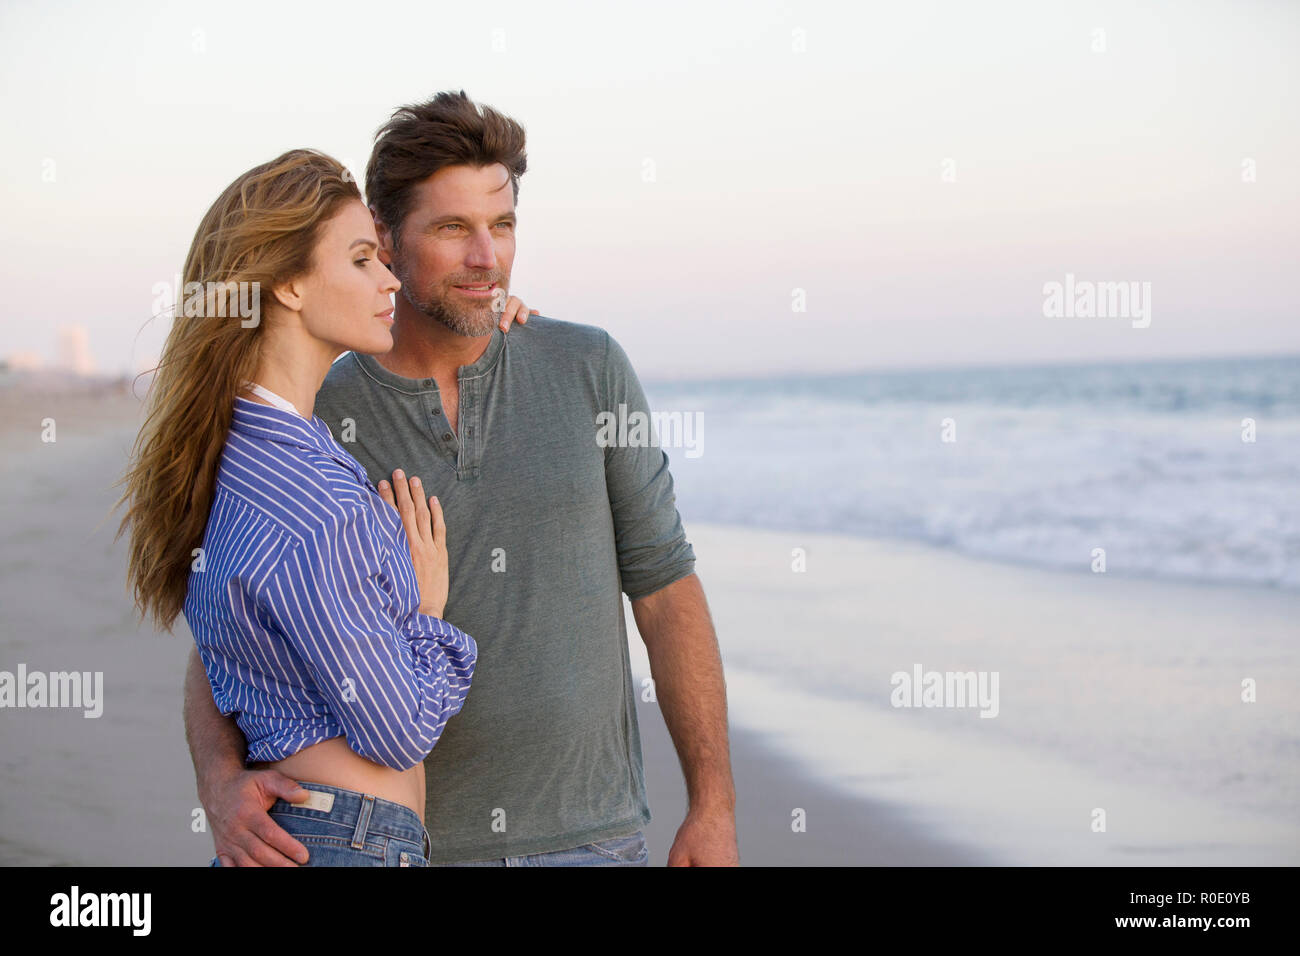 Half-Length Portrait of Mid-Adult Couple at Gazing at Ocean Stock Photo